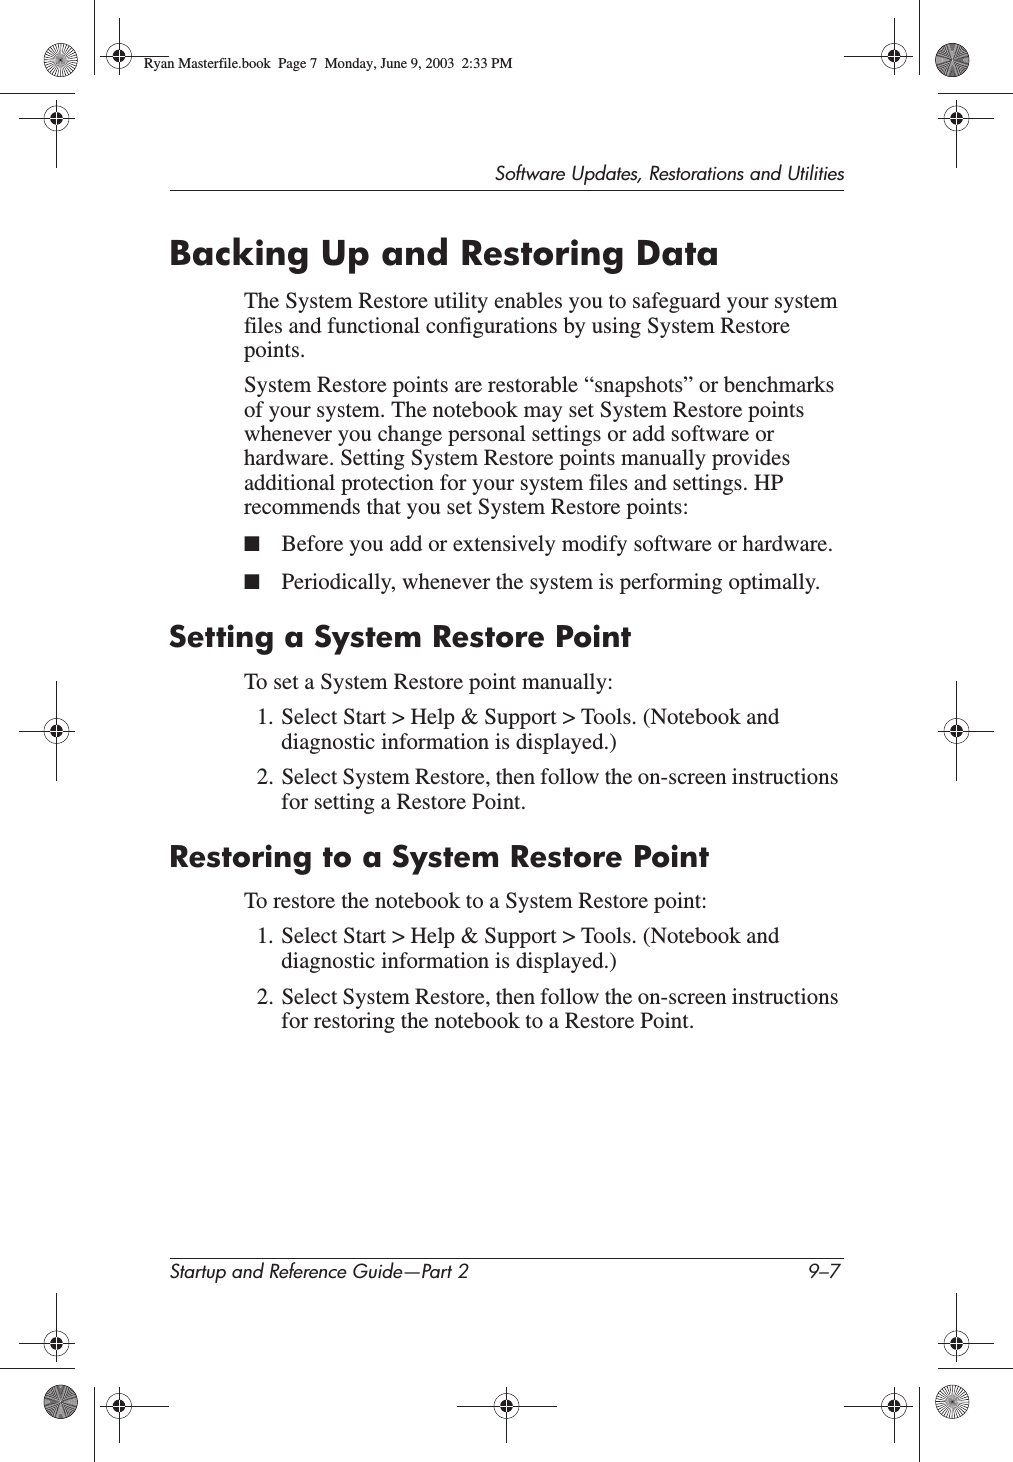 Software Updates, Restorations and UtilitiesStartup and Reference Guide—Part 2 9–7Backing Up and Restoring DataThe System Restore utility enables you to safeguard your system files and functional configurations by using System Restore points.System Restore points are restorable “snapshots” or benchmarks of your system. The notebook may set System Restore points whenever you change personal settings or add software or hardware. Setting System Restore points manually provides additional protection for your system files and settings. HP recommends that you set System Restore points:■Before you add or extensively modify software or hardware.■Periodically, whenever the system is performing optimally.Setting a System Restore PointTo set a System Restore point manually:1. Select Start &gt; Help &amp; Support &gt; Tools. (Notebook and diagnostic information is displayed.) 2. Select System Restore, then follow the on-screen instructions for setting a Restore Point.Restoring to a System Restore PointTo restore the notebook to a System Restore point:1. Select Start &gt; Help &amp; Support &gt; Tools. (Notebook and diagnostic information is displayed.) 2. Select System Restore, then follow the on-screen instructions for restoring the notebook to a Restore Point.Ryan Masterfile.book  Page 7  Monday, June 9, 2003  2:33 PM